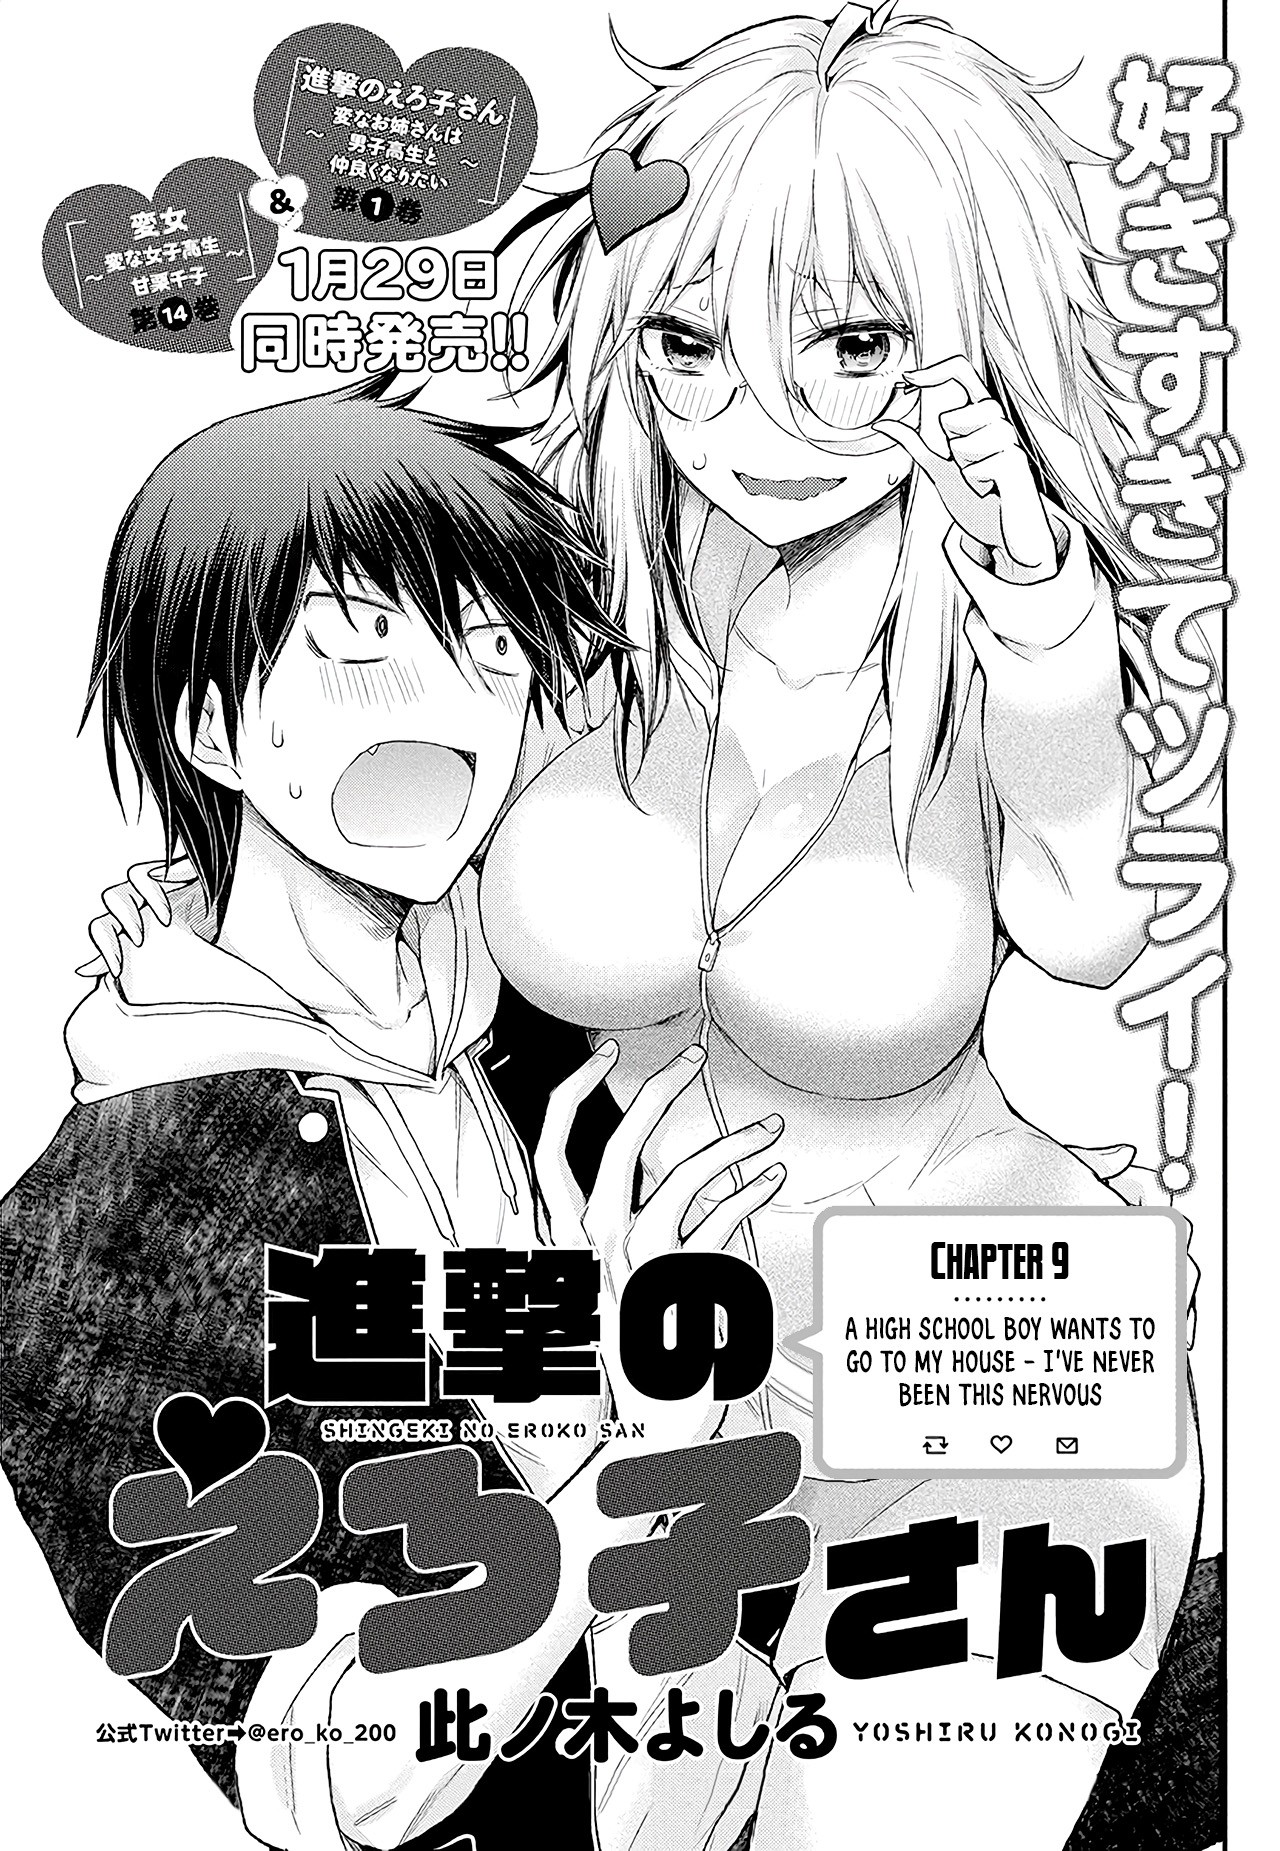 Shingeki No Eroko-San Chapter 9: A High School Boy Wants To Go To My House - I Ve Never Been This Nervous! - Picture 2